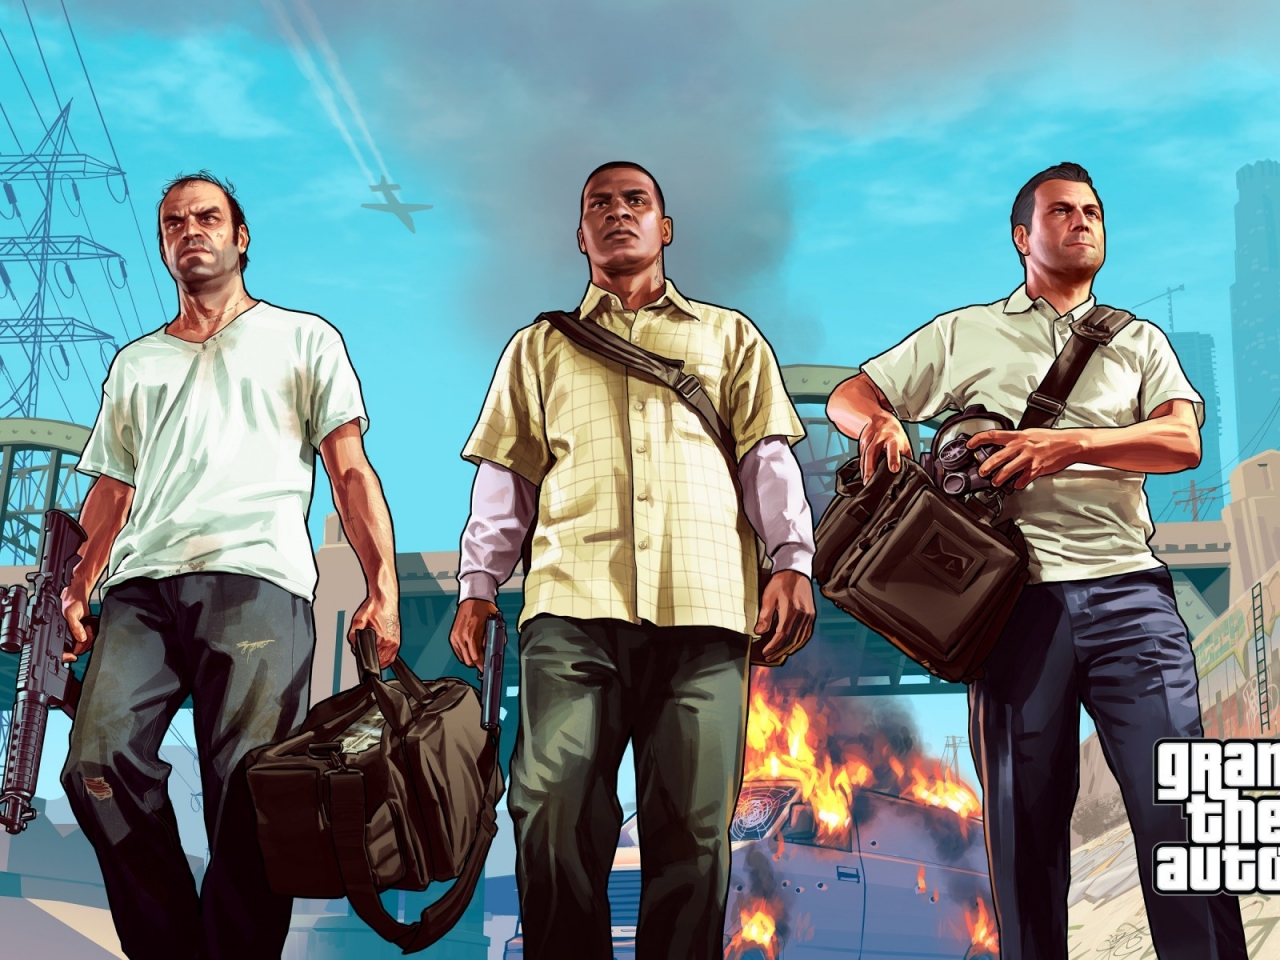 Grand Theft Auto Vice City for 1280 x 960 resolution